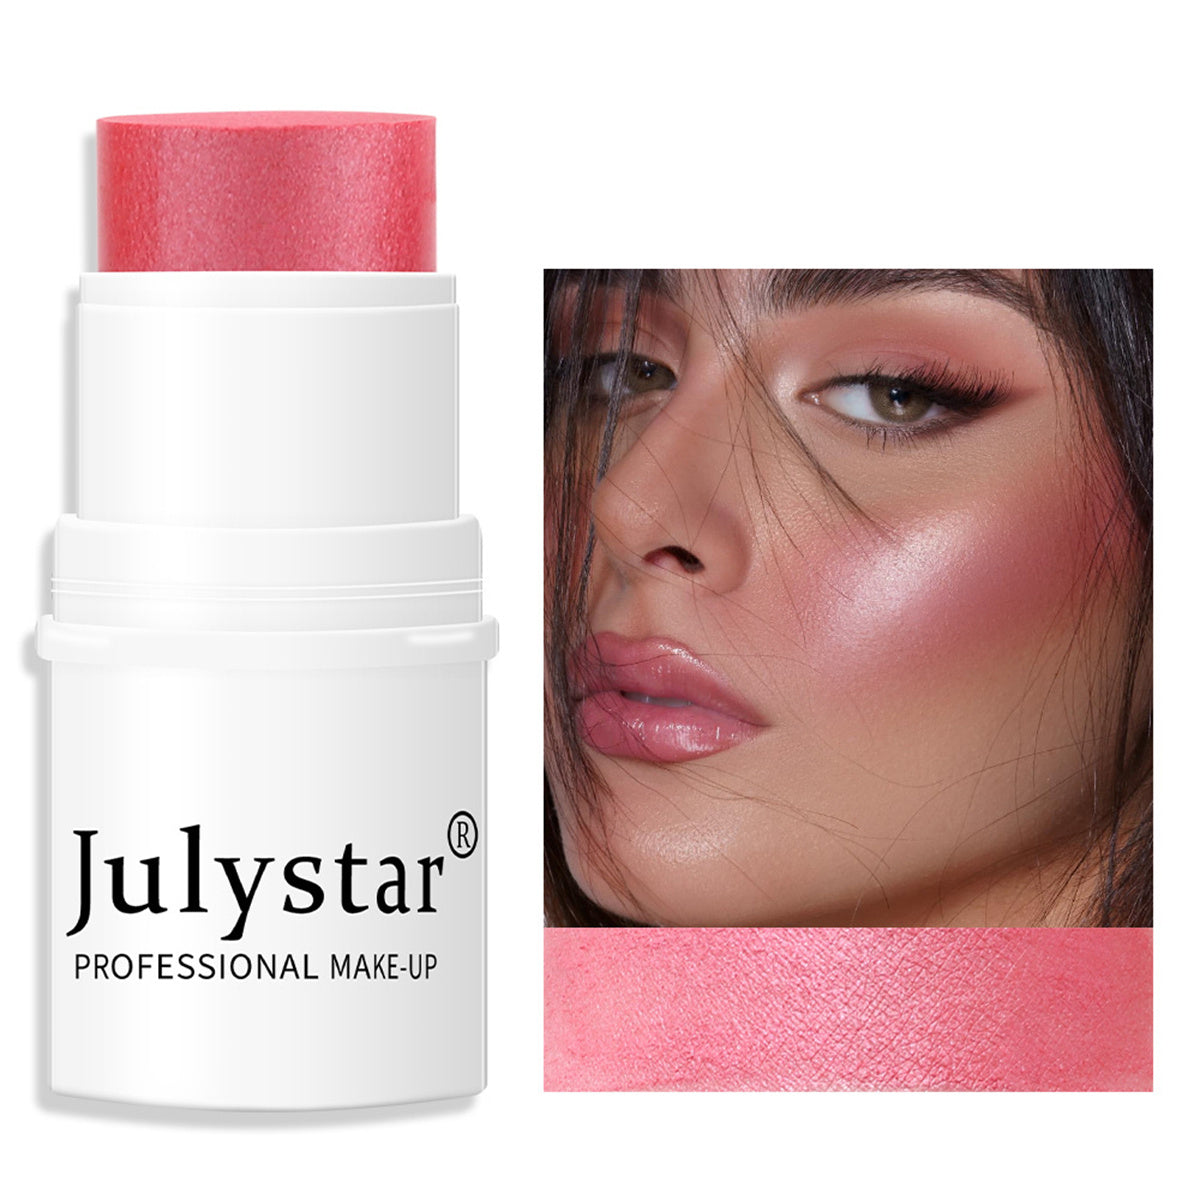 Blush Stick For Cheeks Eyes & Lips Sheer Glow Blendable and Buildable Color 2-in-1 Blush and Cheek Makeup Stick